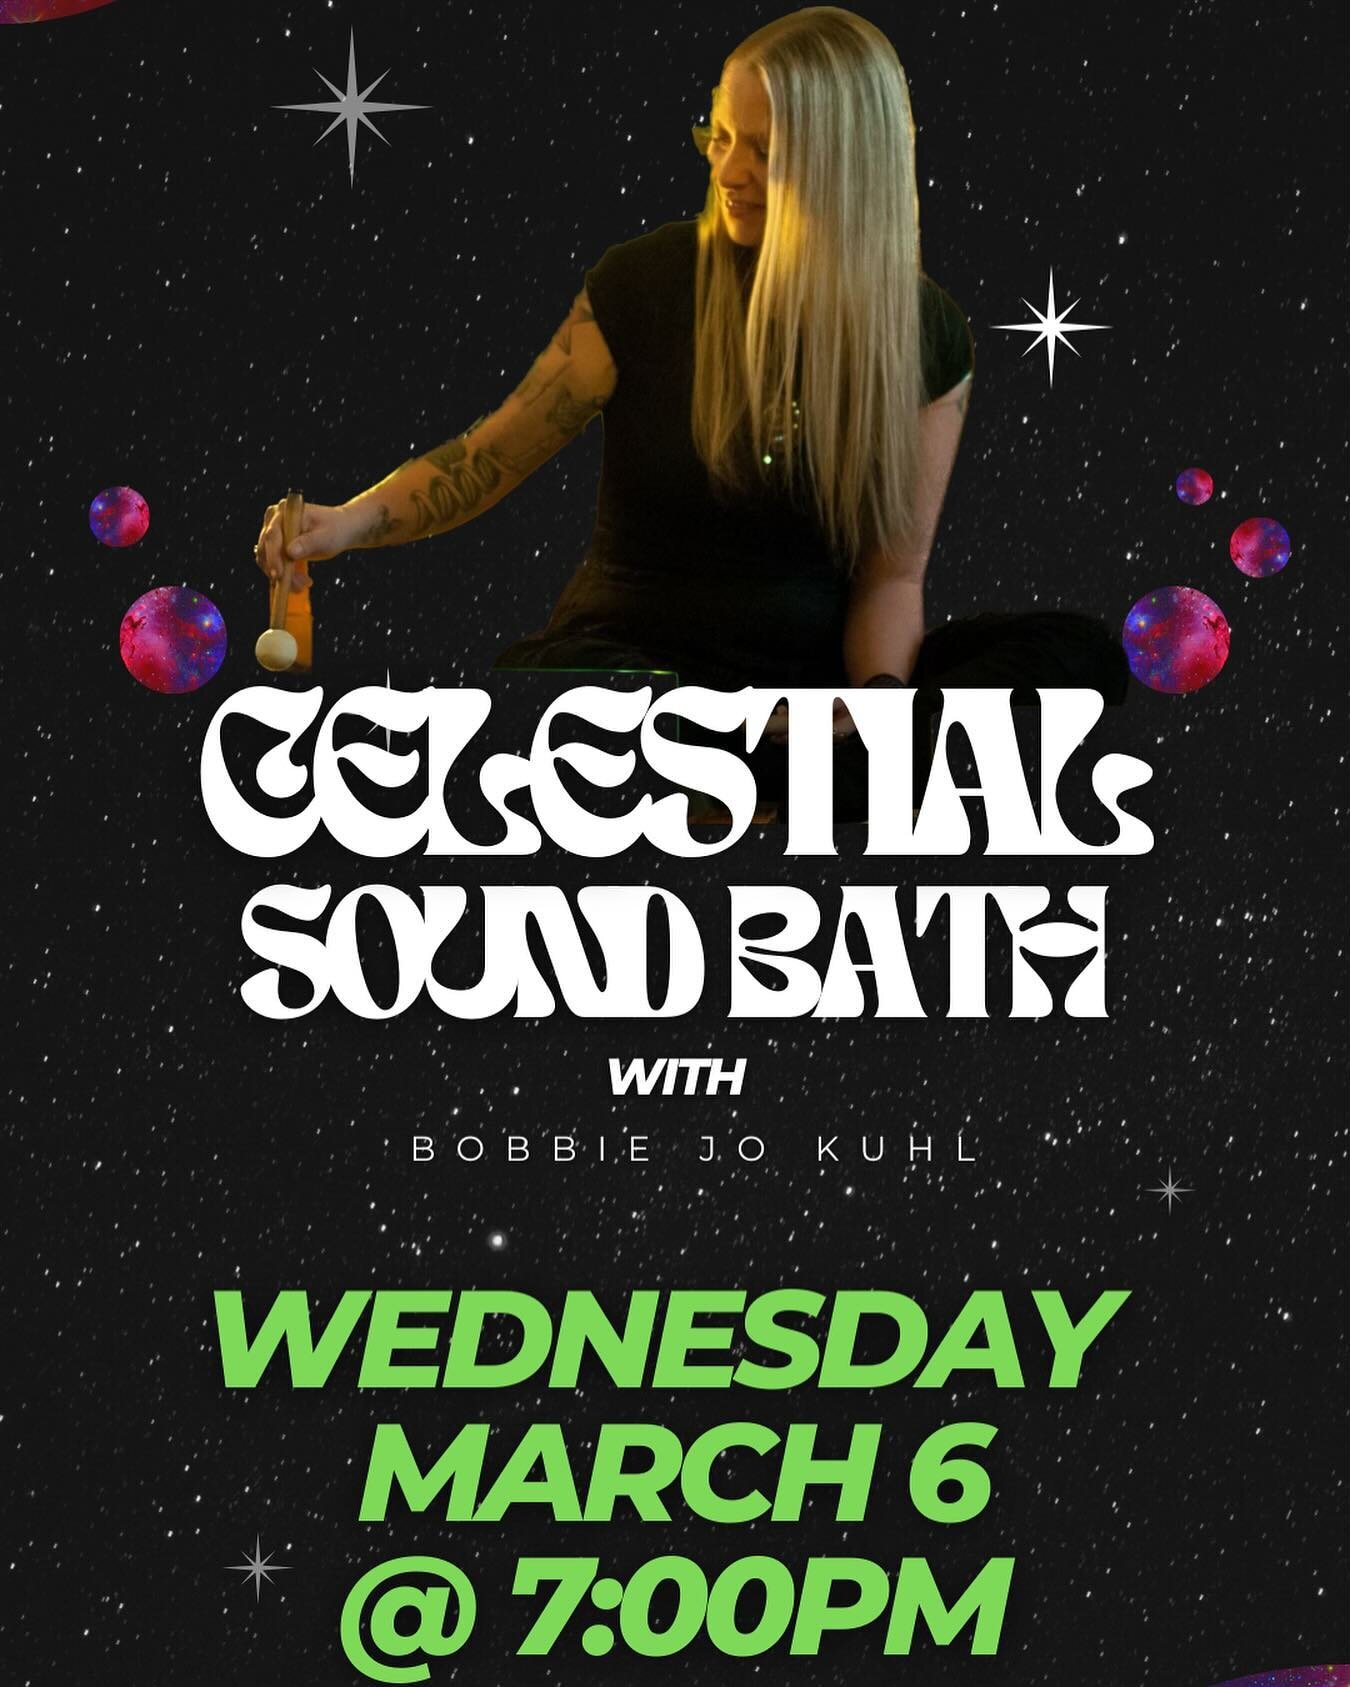 ✨Bobbie Jo Kuhl is back for another Celestial Sound Bath experience! 

✨We will expand our energy levels in our chakras and activate our DNA to a higher level using crystal singing bowls, chimes and the Atlas gong. 

✨Wednesday March 6, 7:00pm-8:30 $